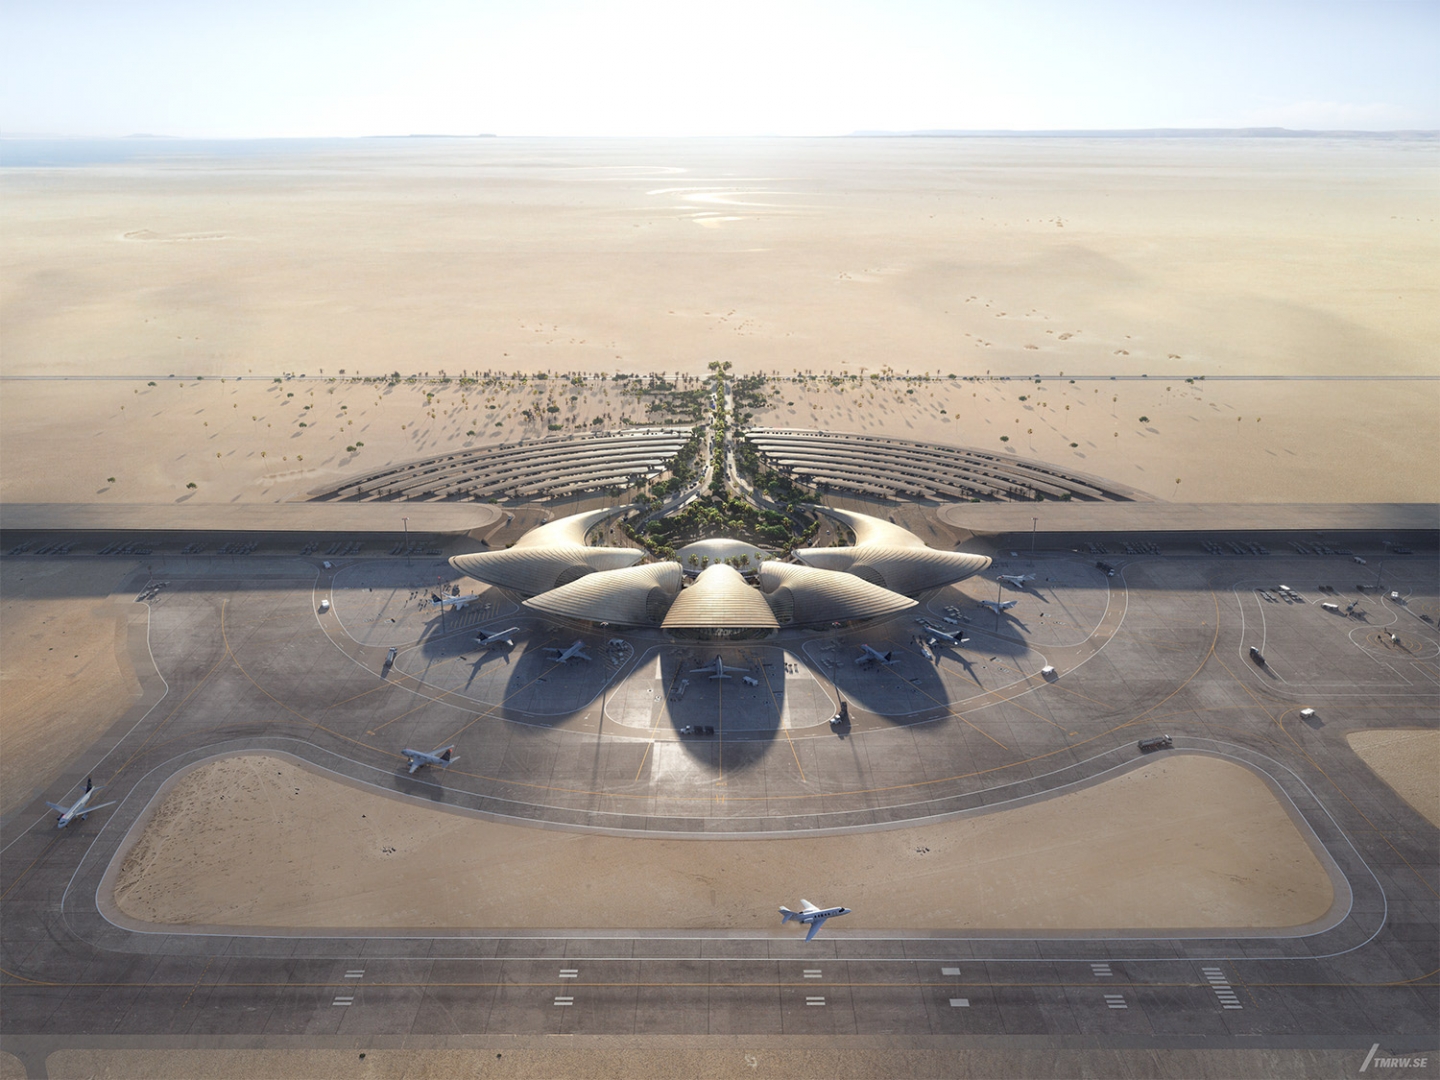 Architectural visualization of Ferring for Foster & Partners. A image of a airport from a aerial view in daylight in the desert.